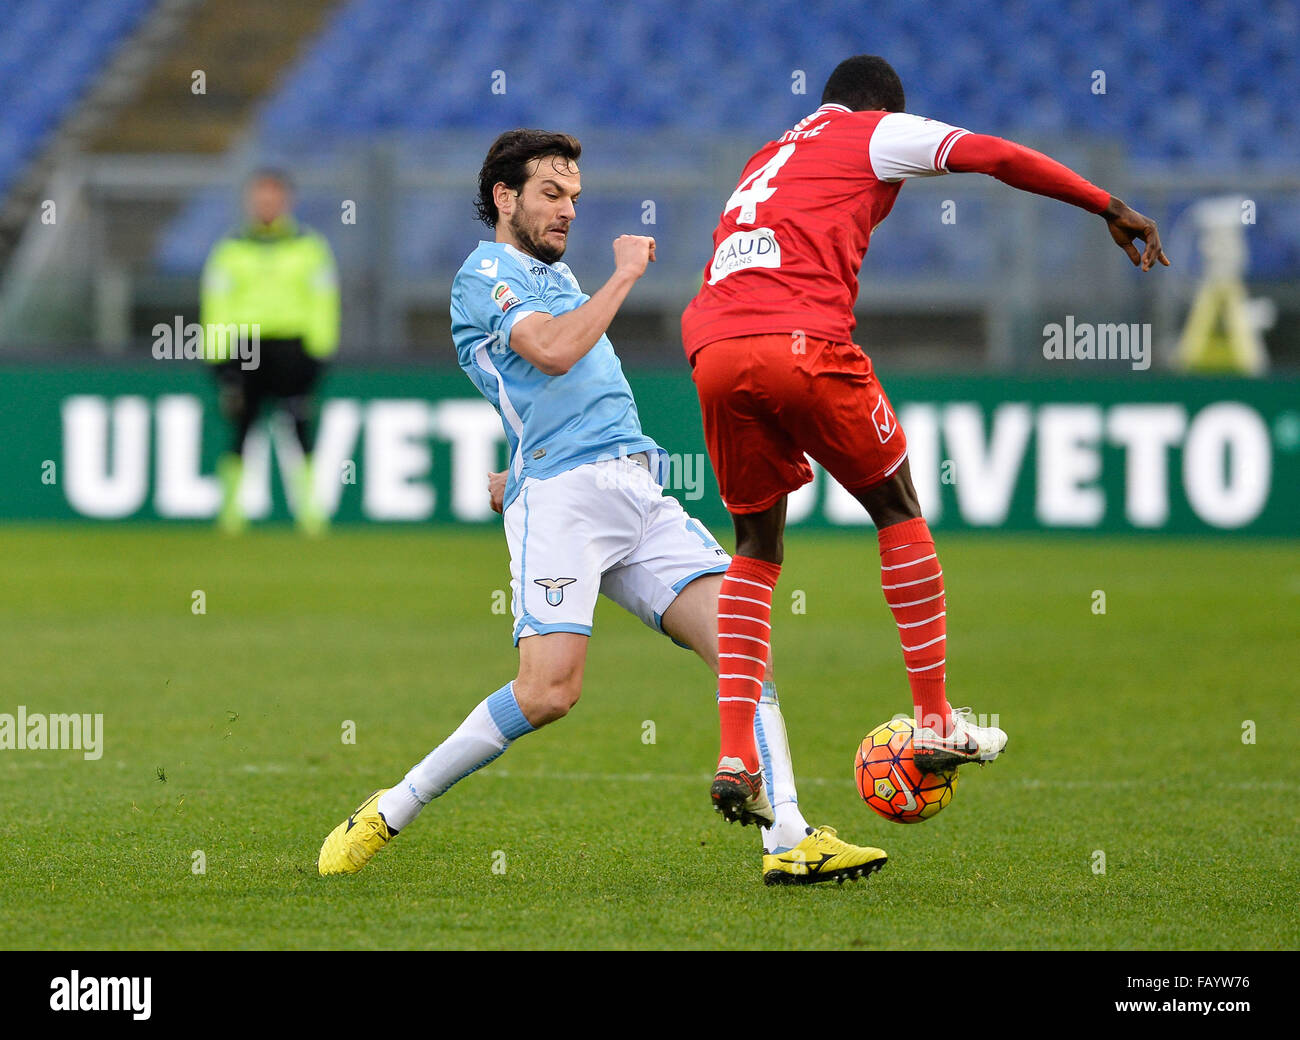 Marco Parolo fights for the ball with Isaac Cofie during the Italian Serie A football match S.S. Lazio vs F.C. Carpi at the Olympic Stadium in Rome, on January 06, 2016. Stock Photo